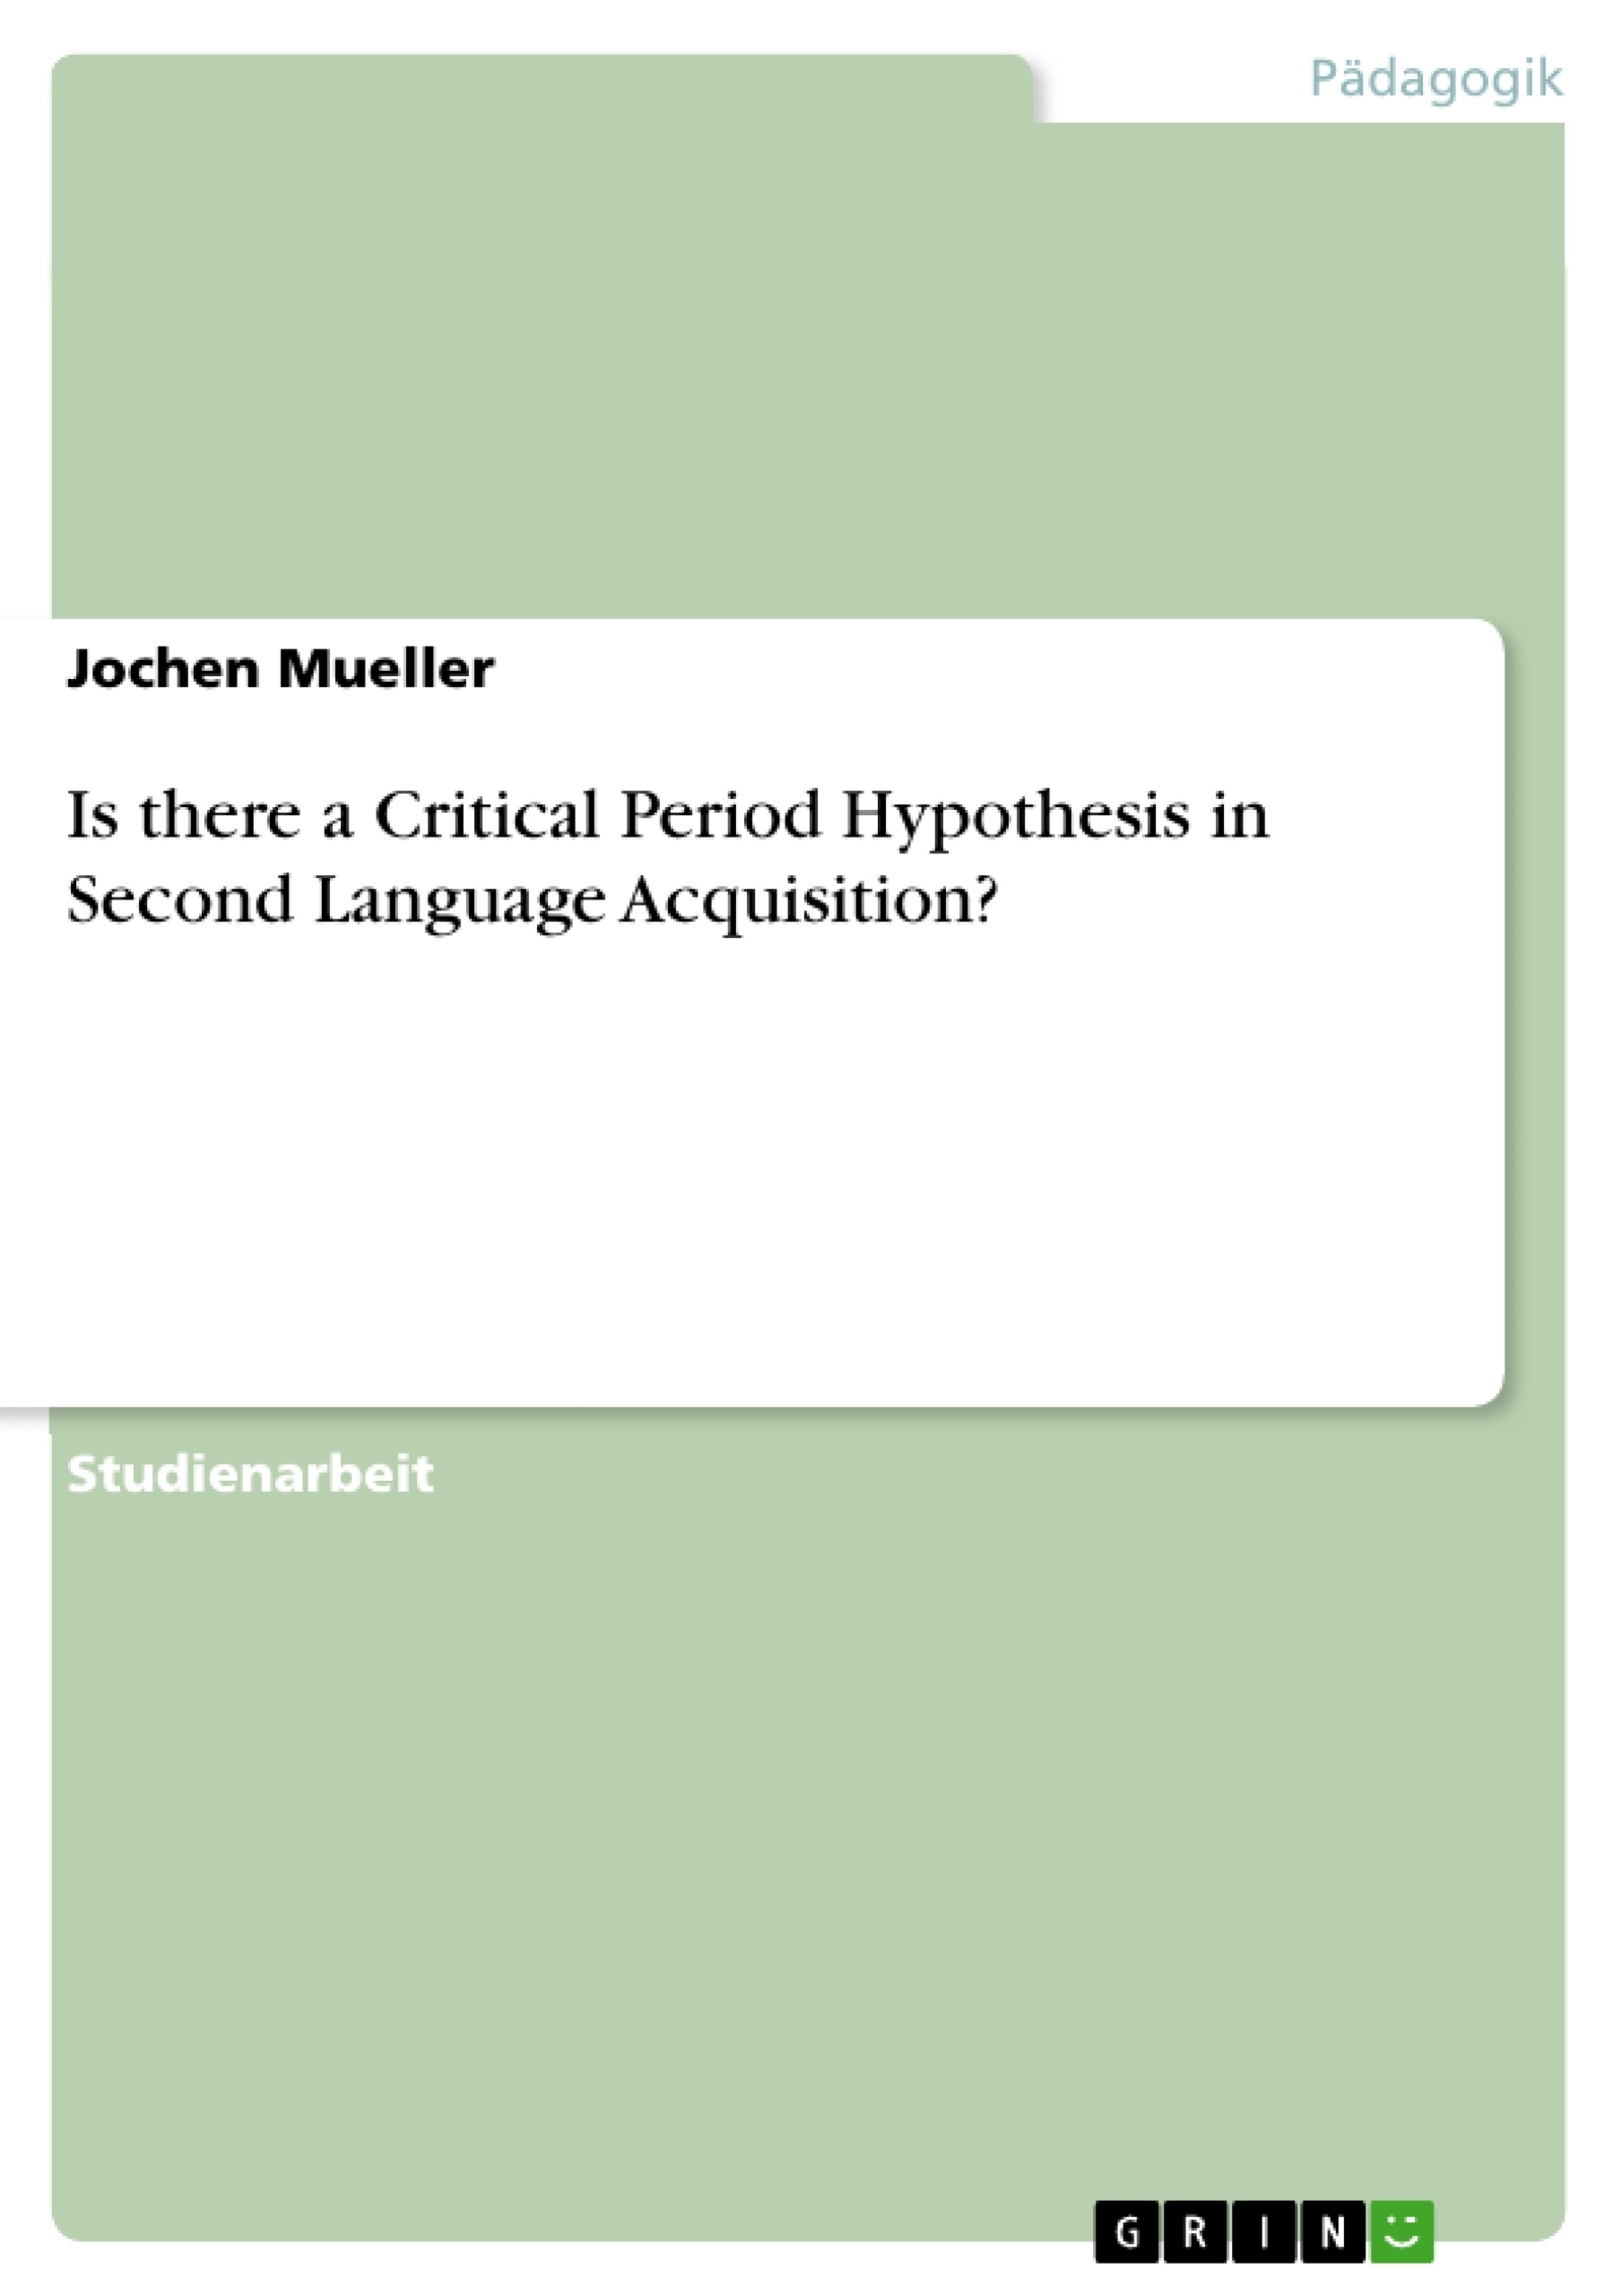 Título: Is there a Critical Period Hypothesis in Second Language Acquisition?